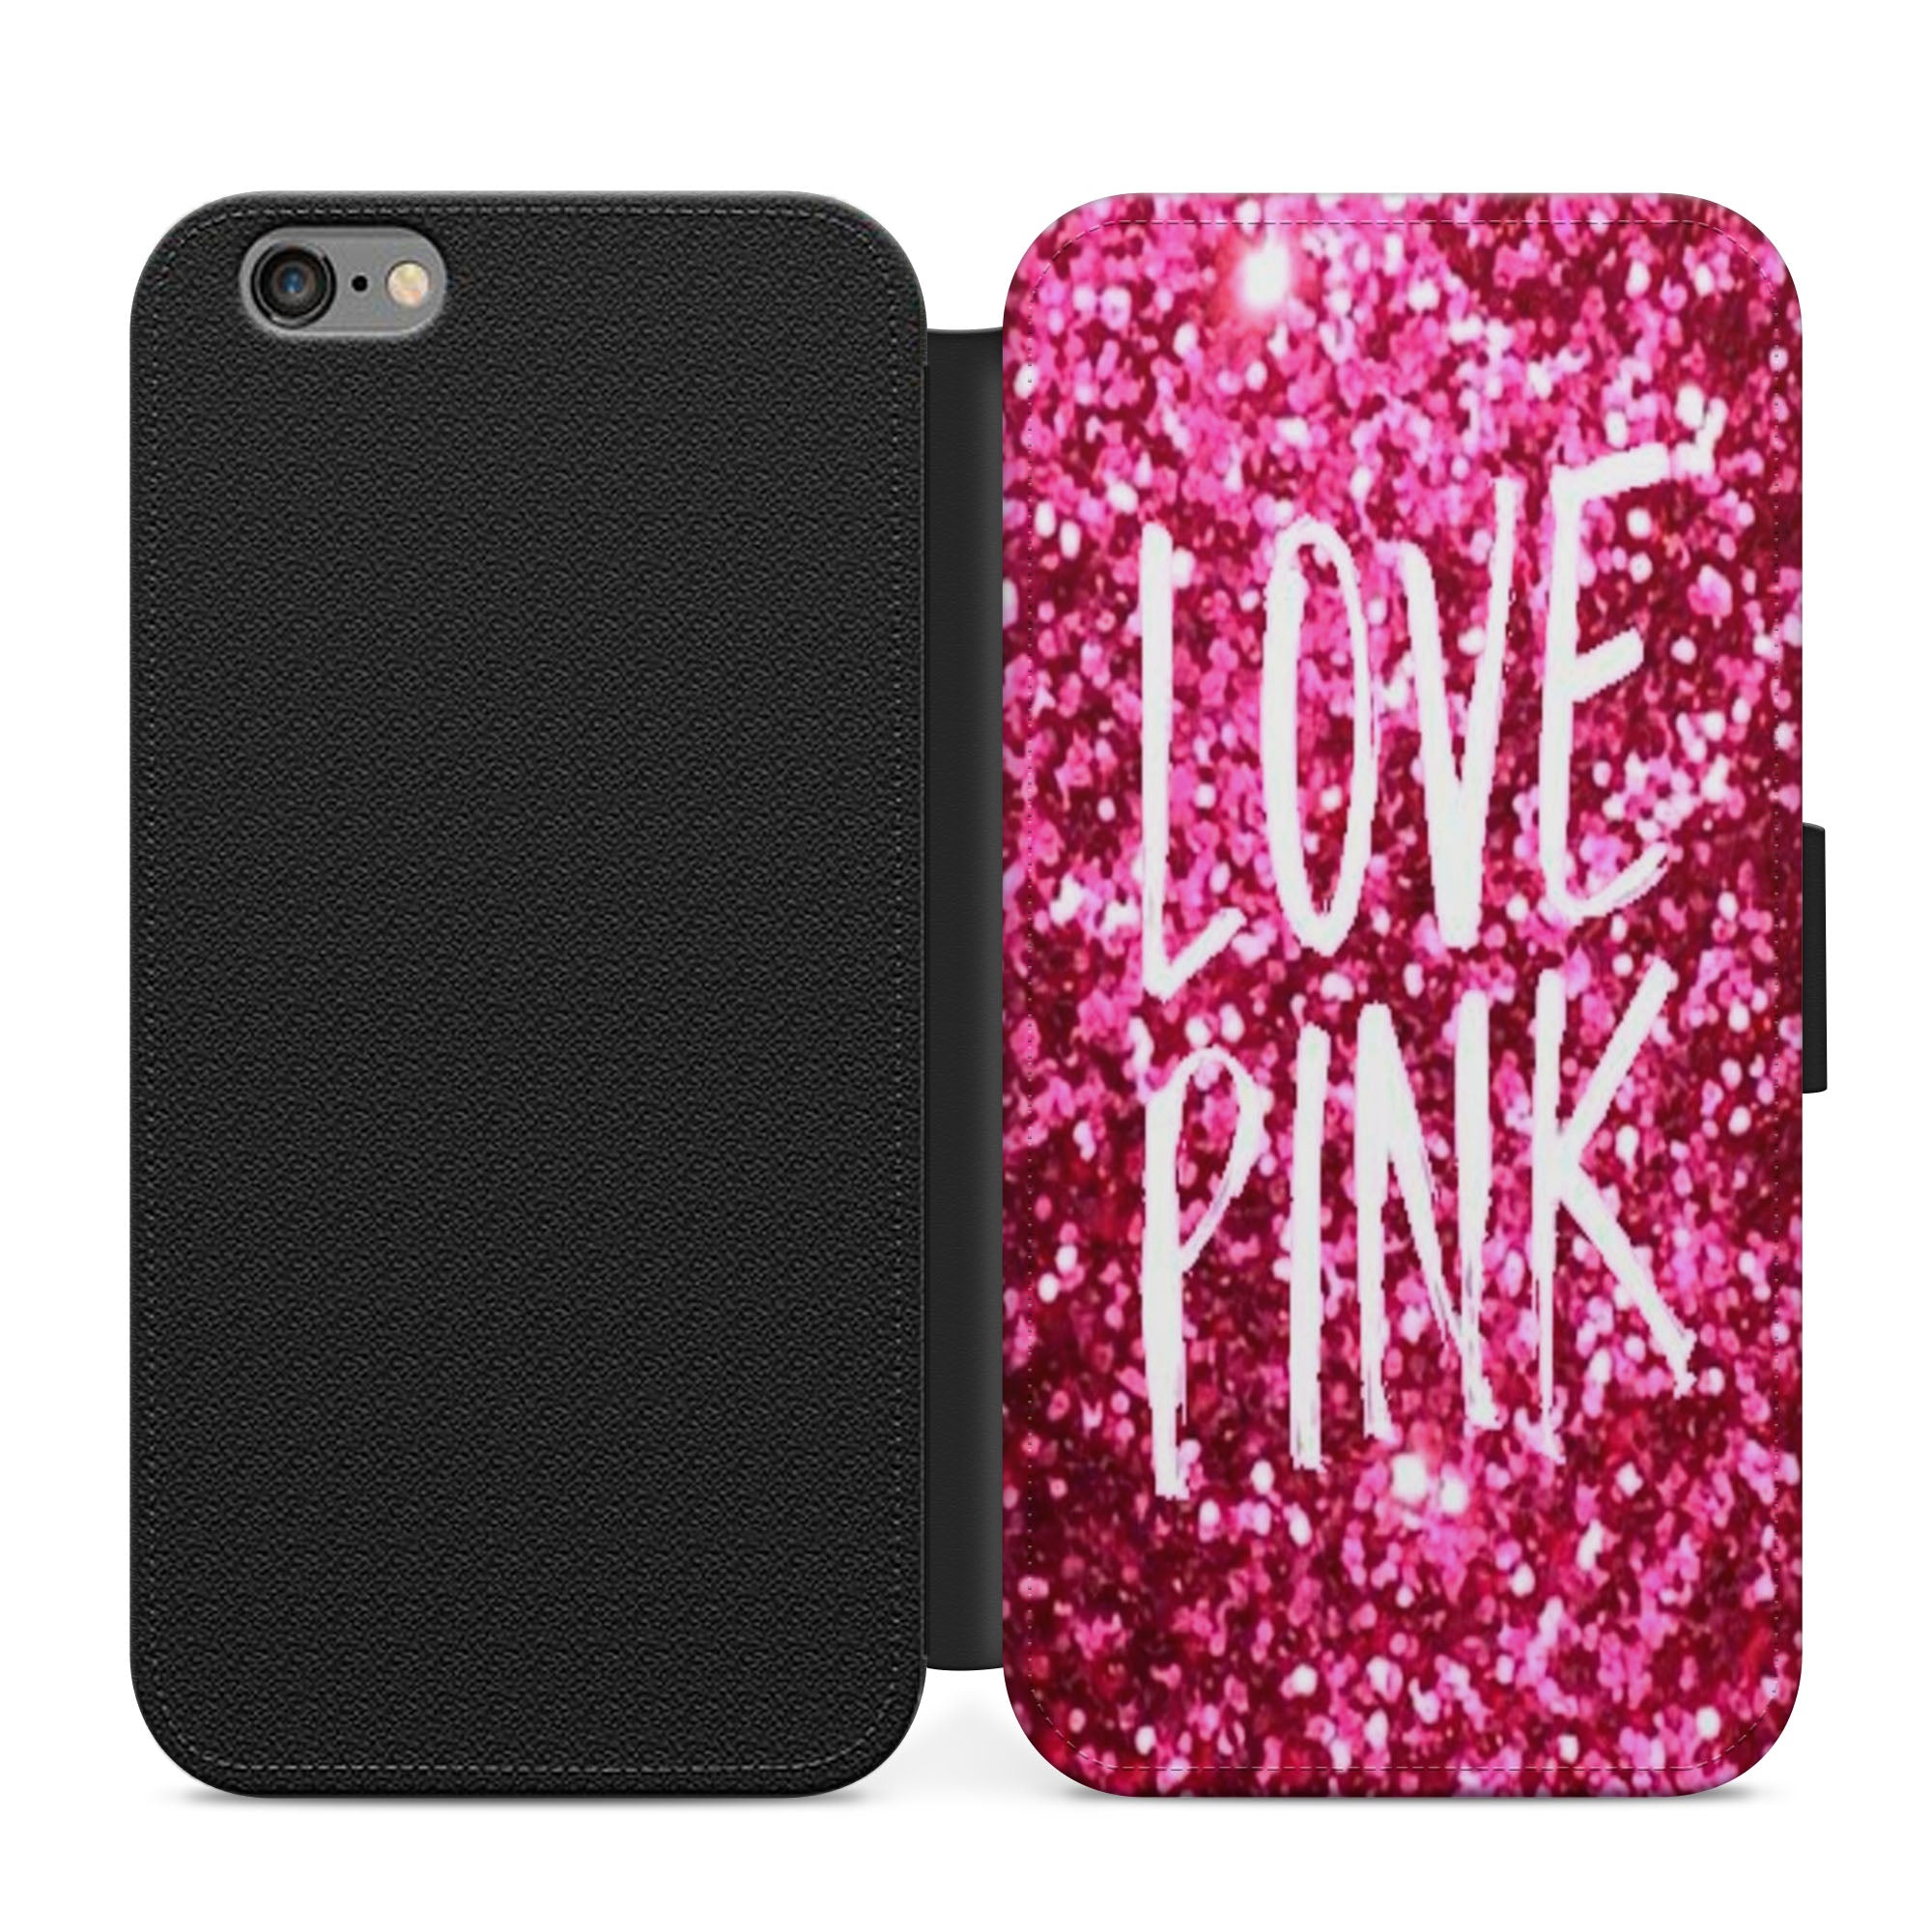 Love Pink Faux Leather Flip Case Wallet for iPhone / Samsung